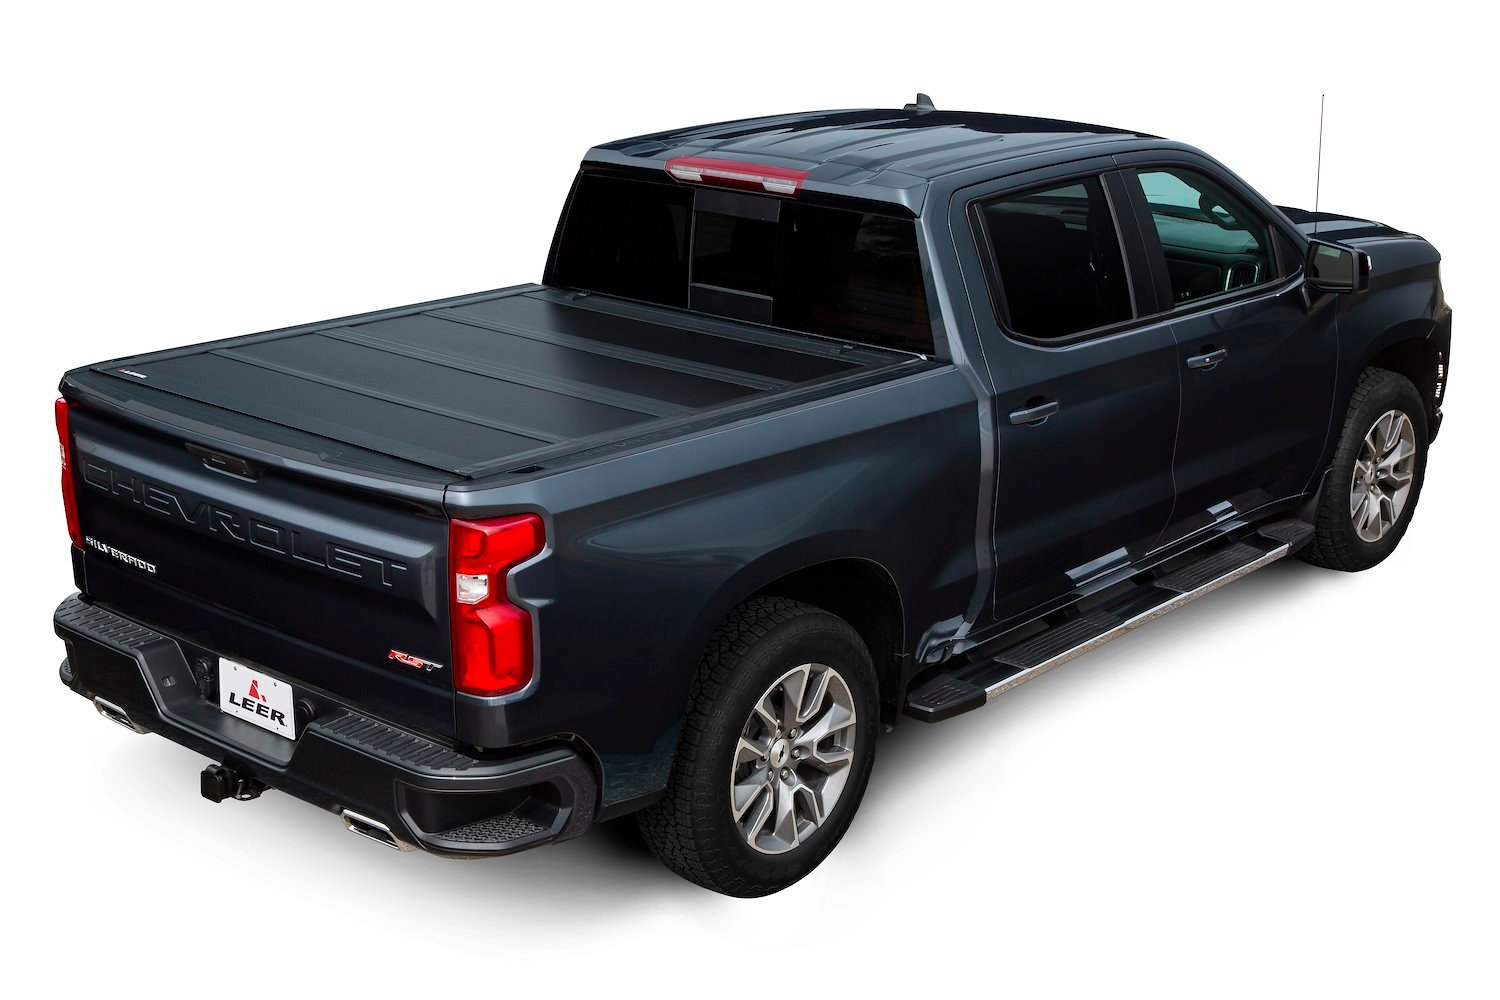 HF650M Hard Quad-Folding Tonneau Cover Fits Select Ram 1500 [Bed Length: 5 ft 7 in.]